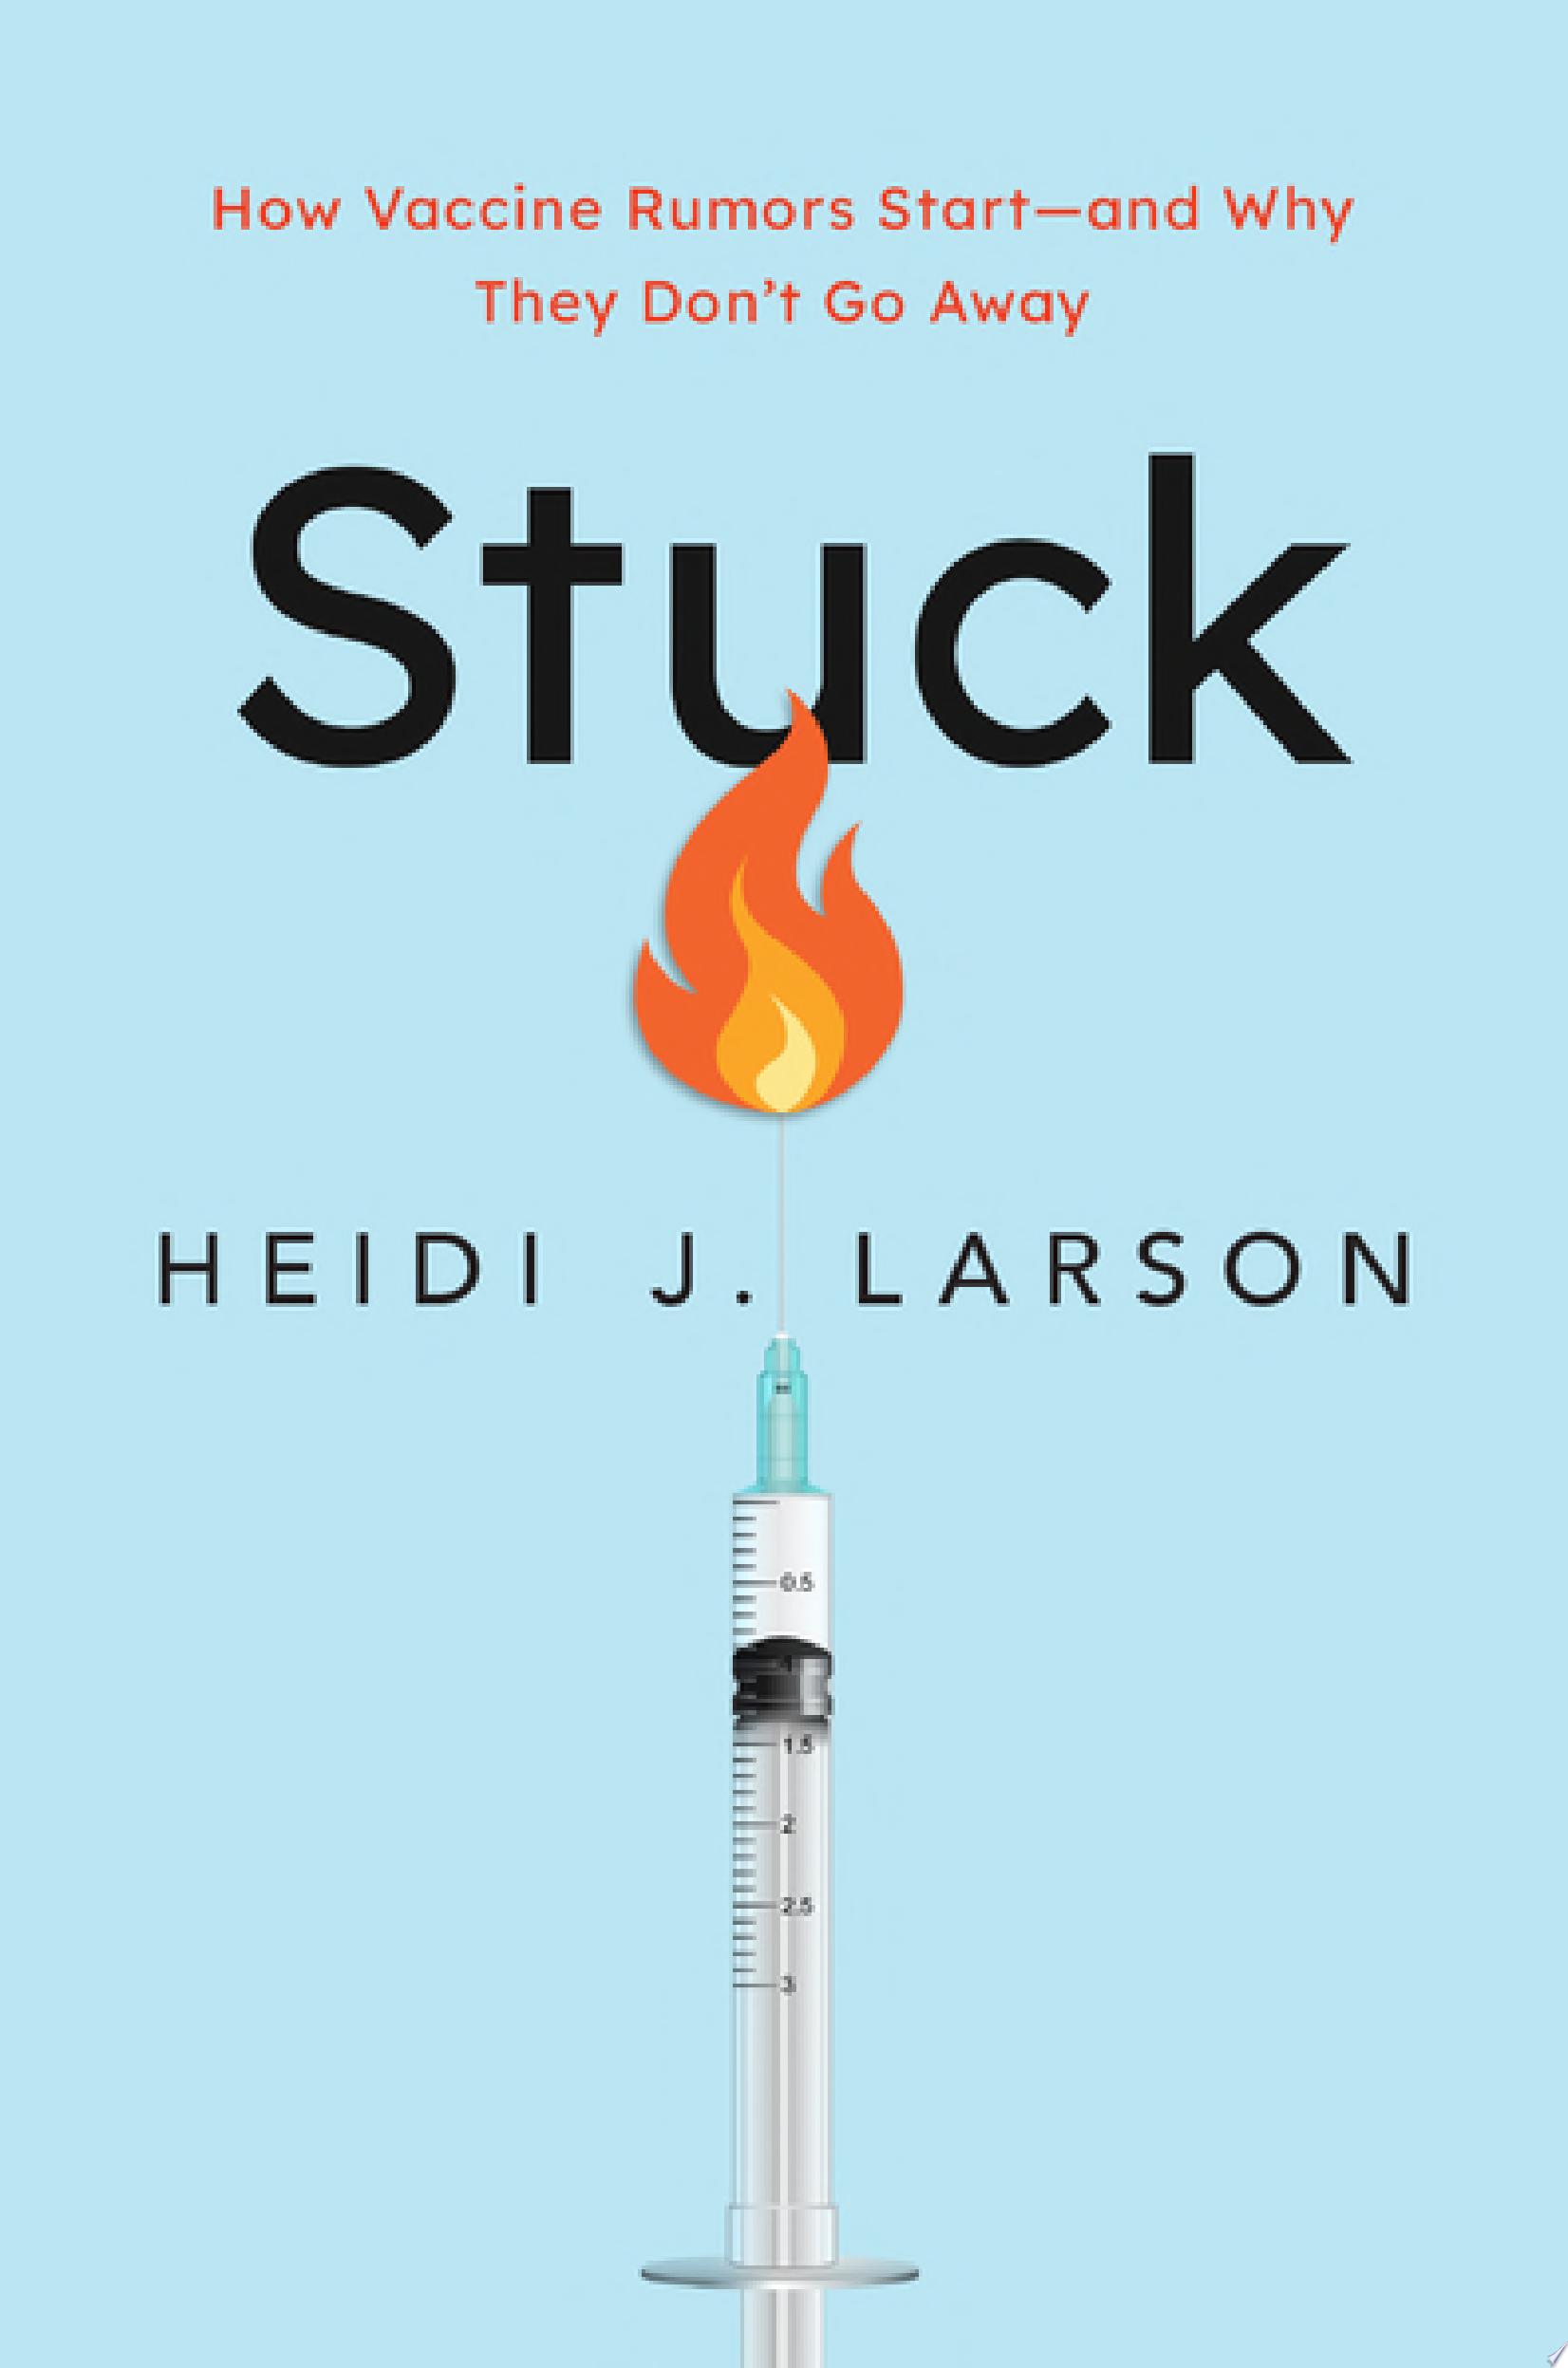 Image for "Stuck"